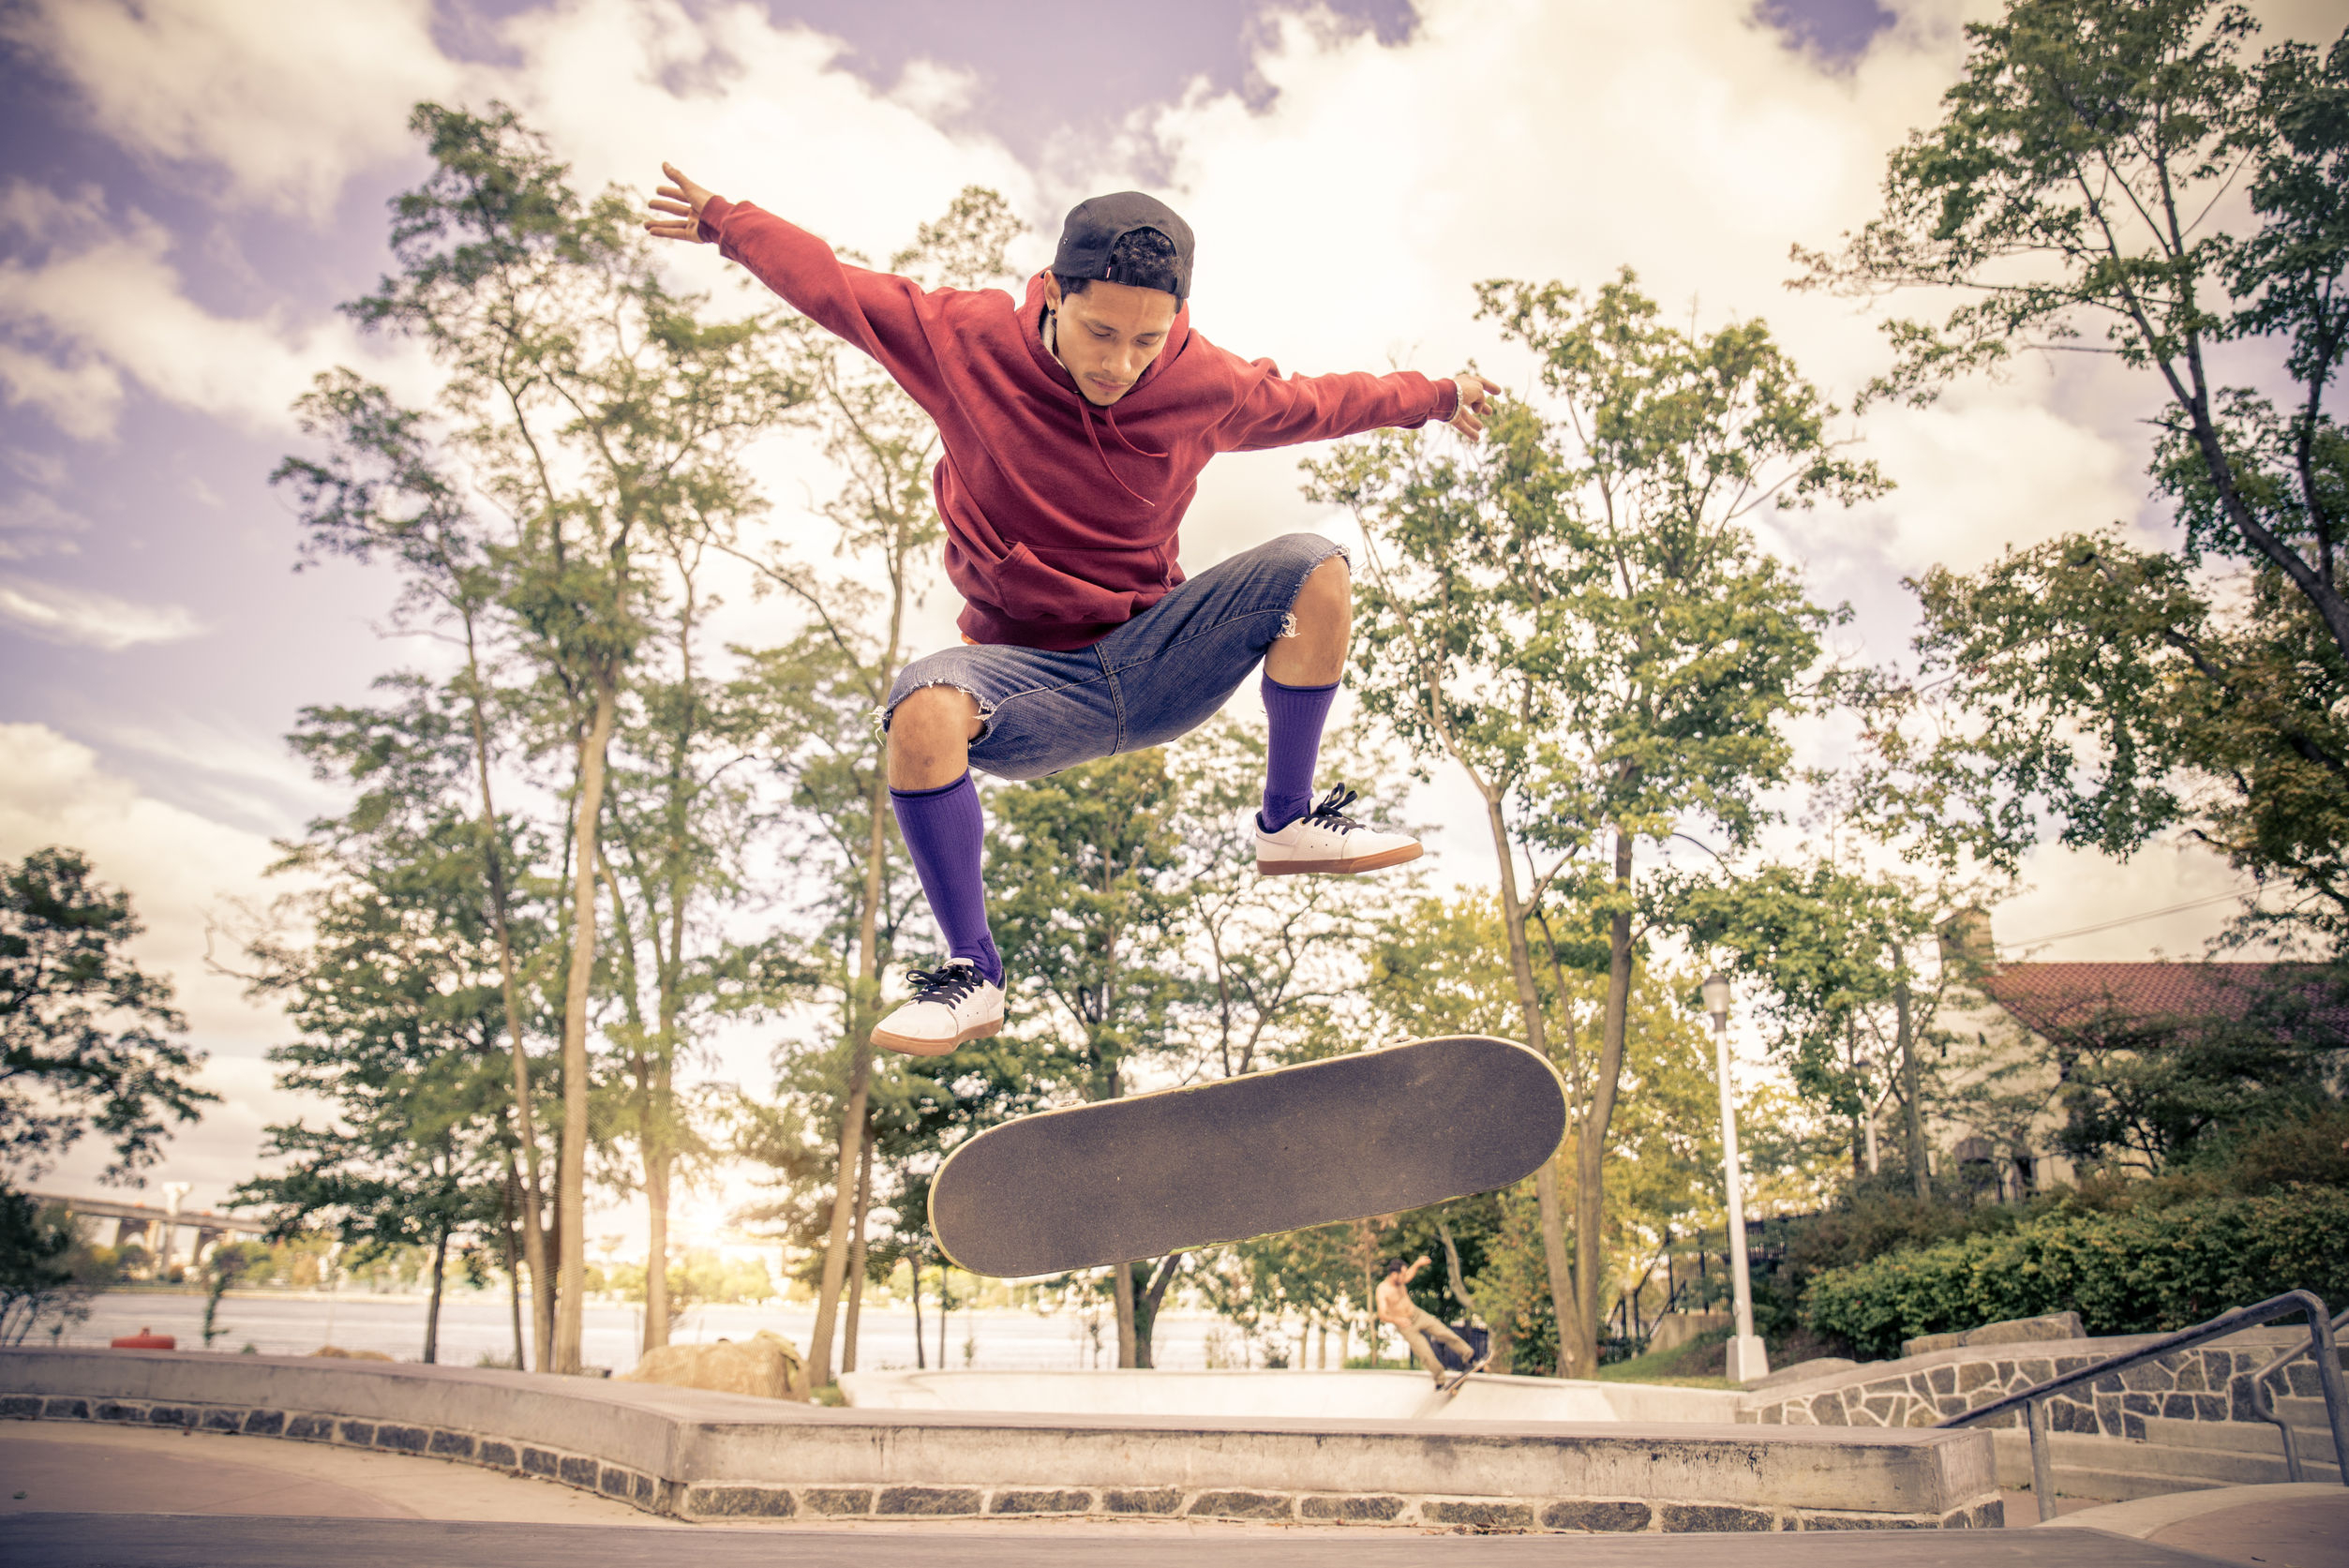 man skateboarding what skateboard taught me about resilience and progression